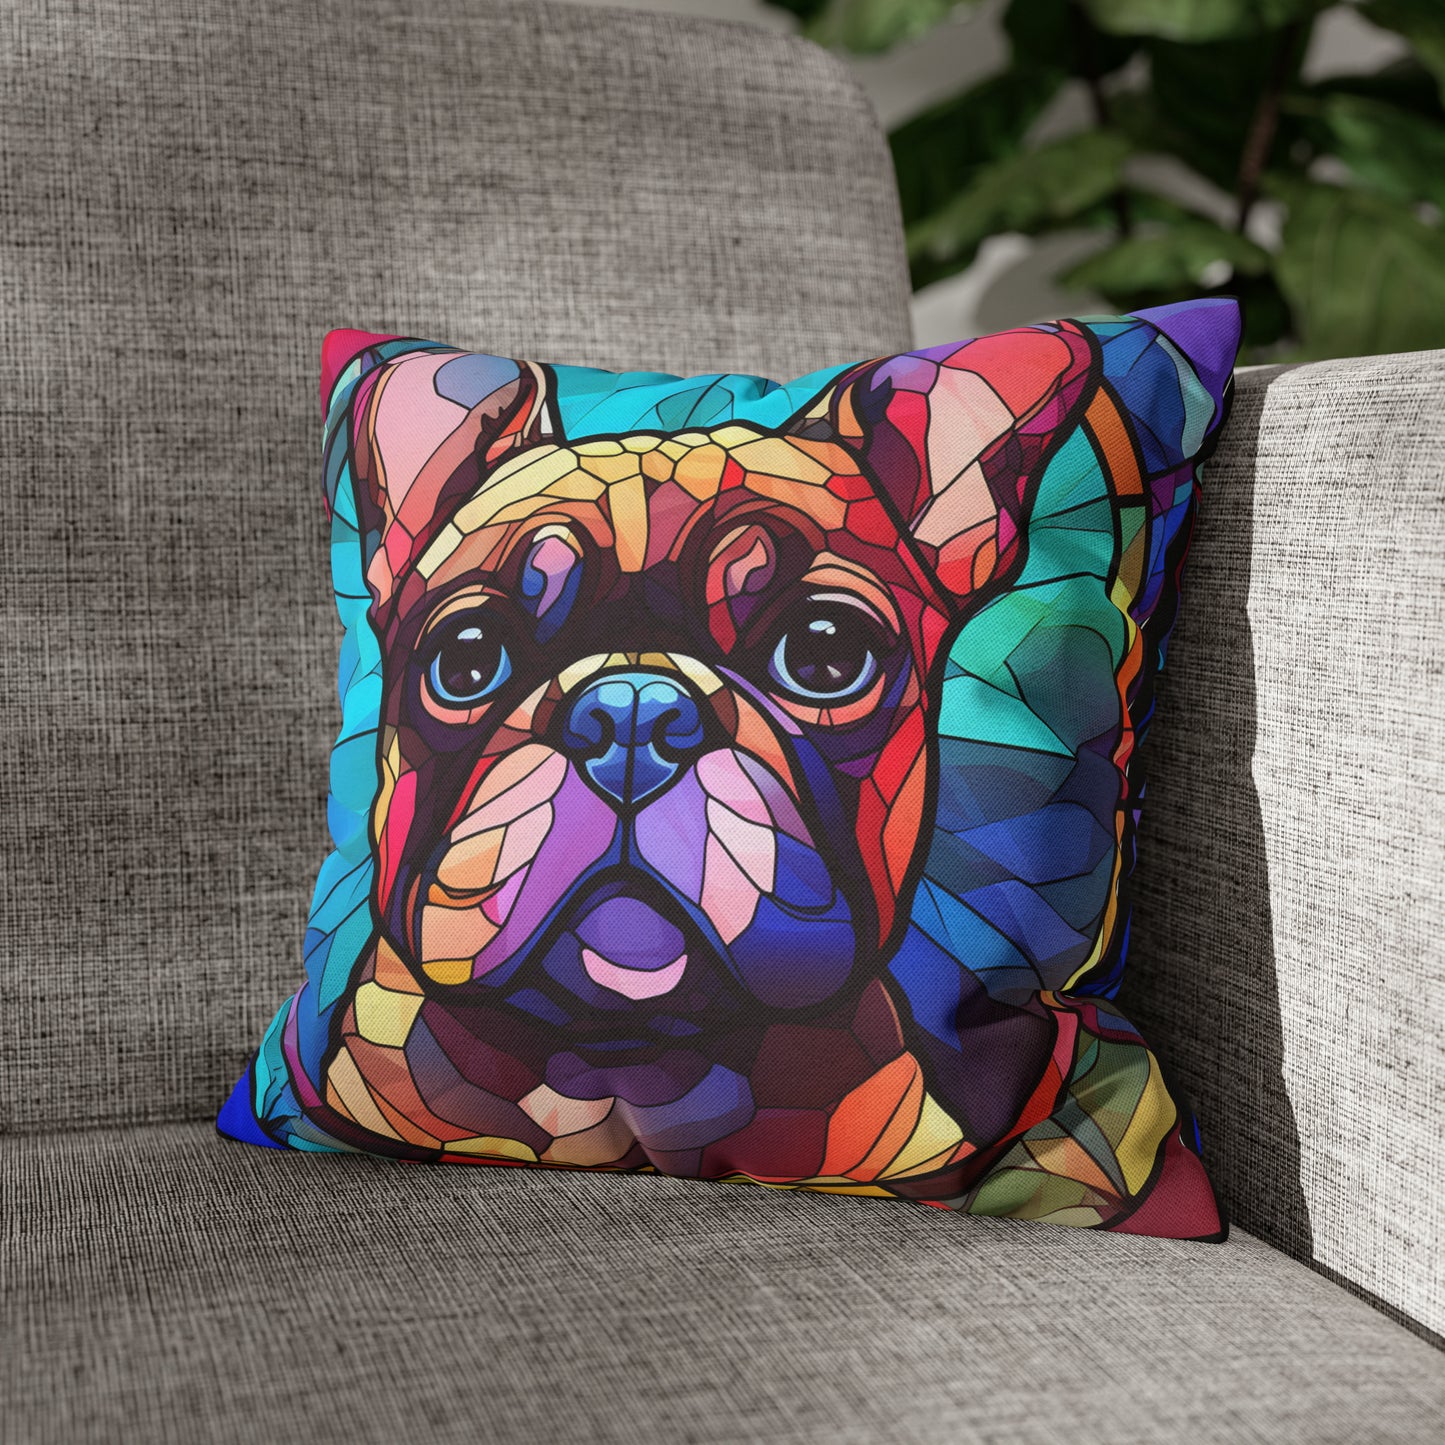 FRENCH BULLDOG Square Pillow Case